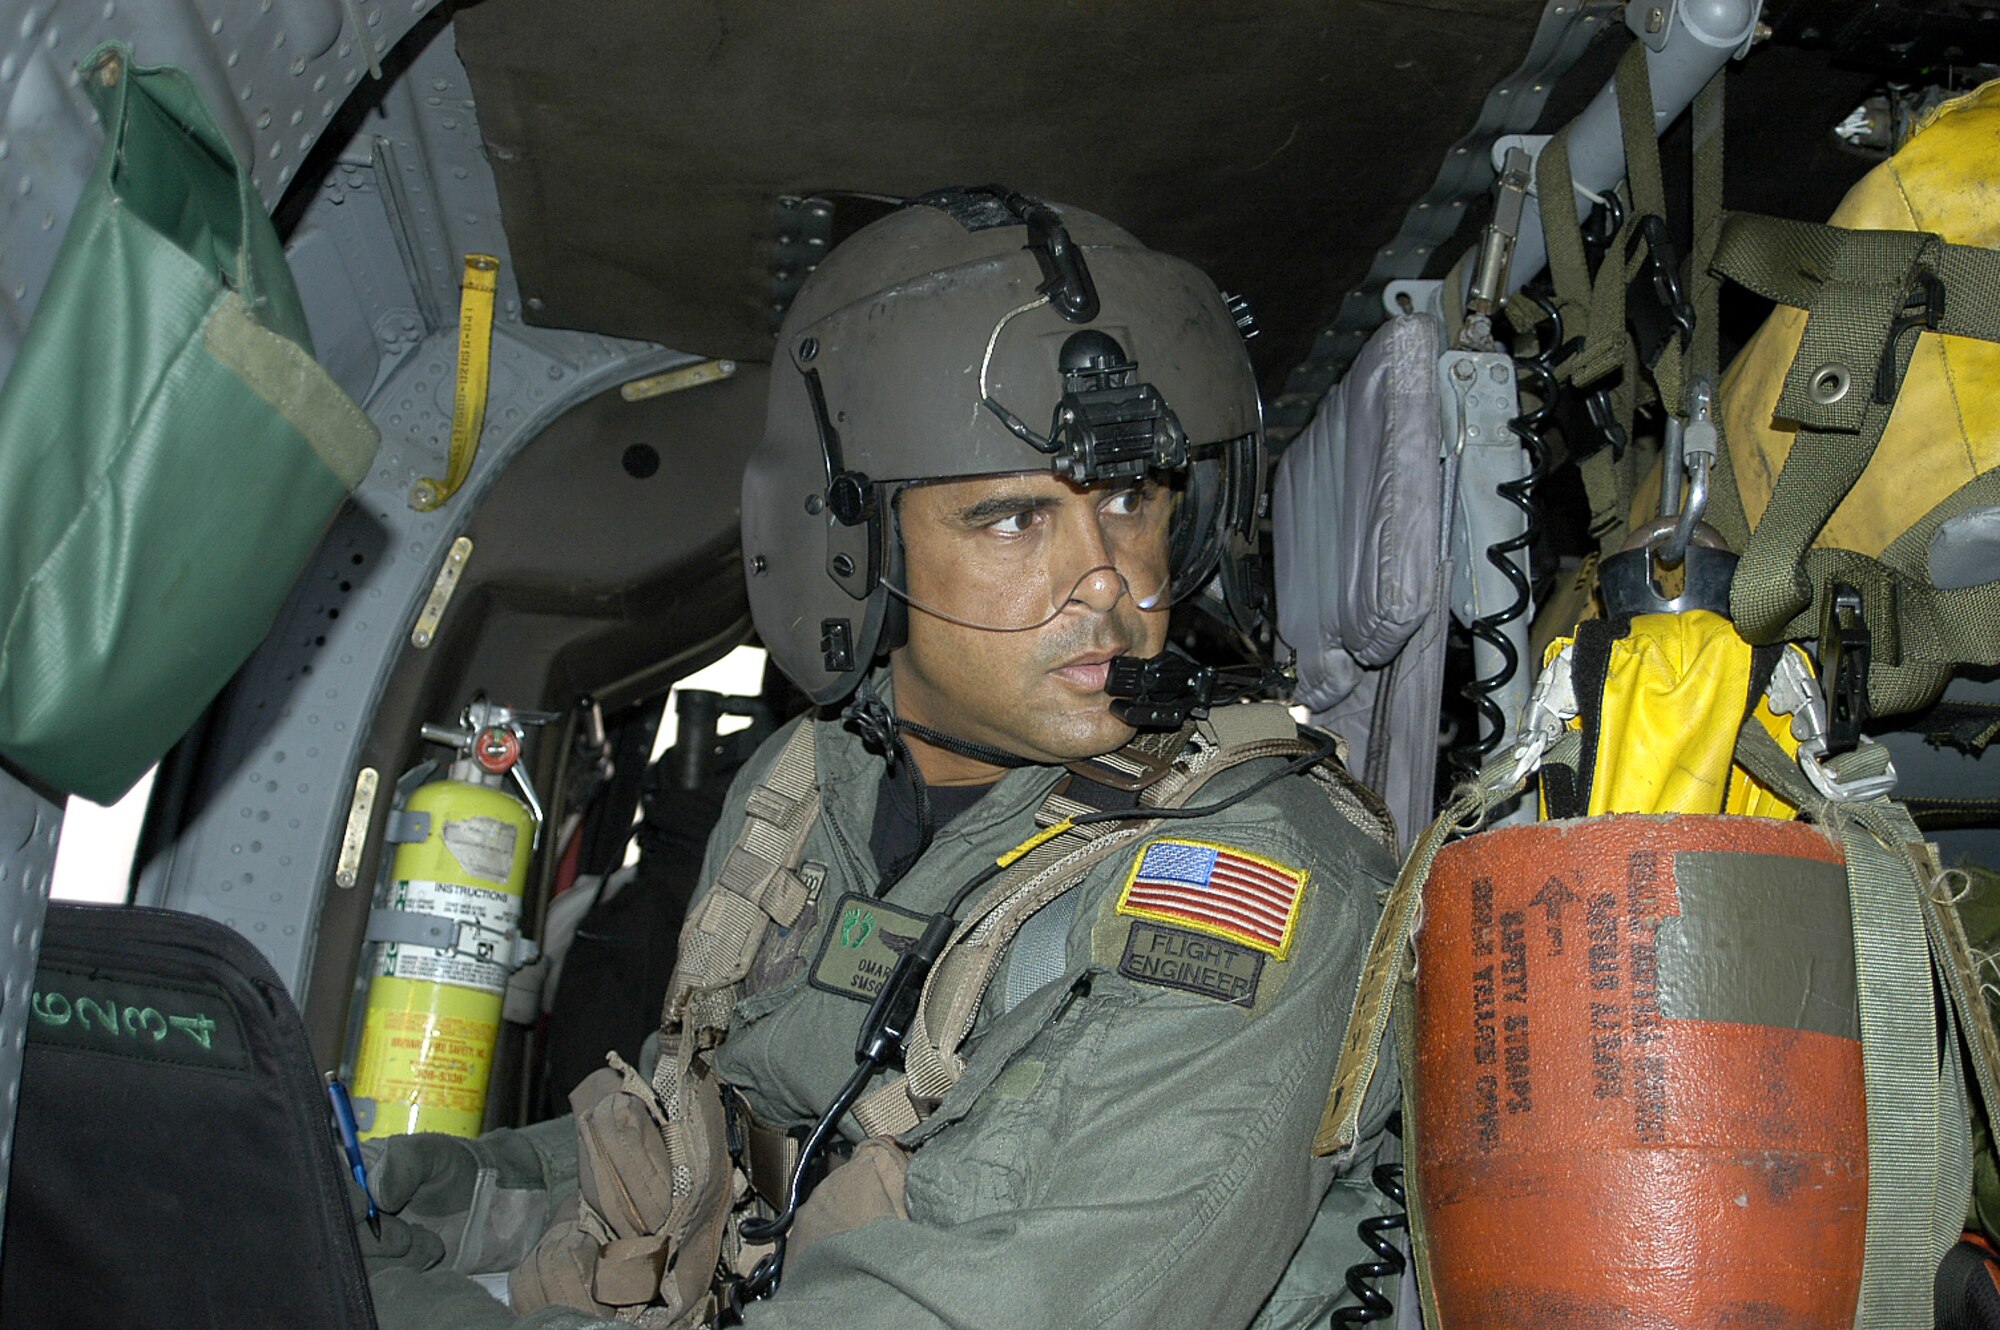 Preparing to take off, Senior Master Sgt. Omar Rivera, an Air Reserve Technician and flight engineer with the 920th Rescue Wing, ensures all systems are go aboard his HH-60 Pave Hawk helicopter Sept. 10.  Working around the clock, Sergeant Rivera and about 100 other reservists supported and flew 6 helicopters saving 472 people in one day. (Air Force photo by Senior Master Sgt. Elaine Mayo)